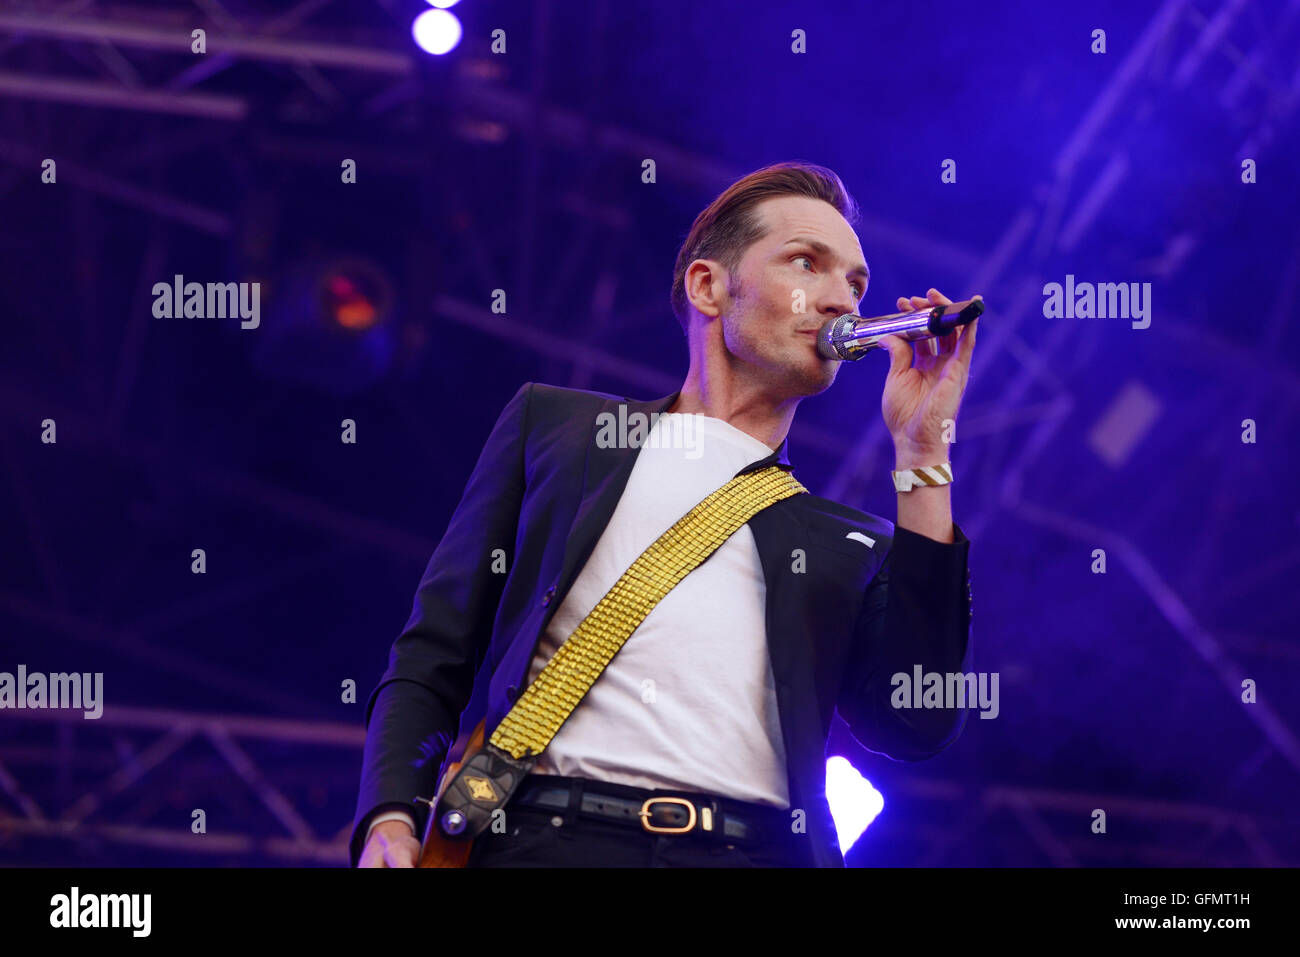 Carfest North, Bolesworth, Cheshire, UK. 31st July 2016. The Feeling performing on the main stage. The event is the brainchild of Chris Evans and features 3 days of cars, music and entertainment with profits being donated to the charity Children in Need. Andrew Paterson/Alamy Live News Stock Photo